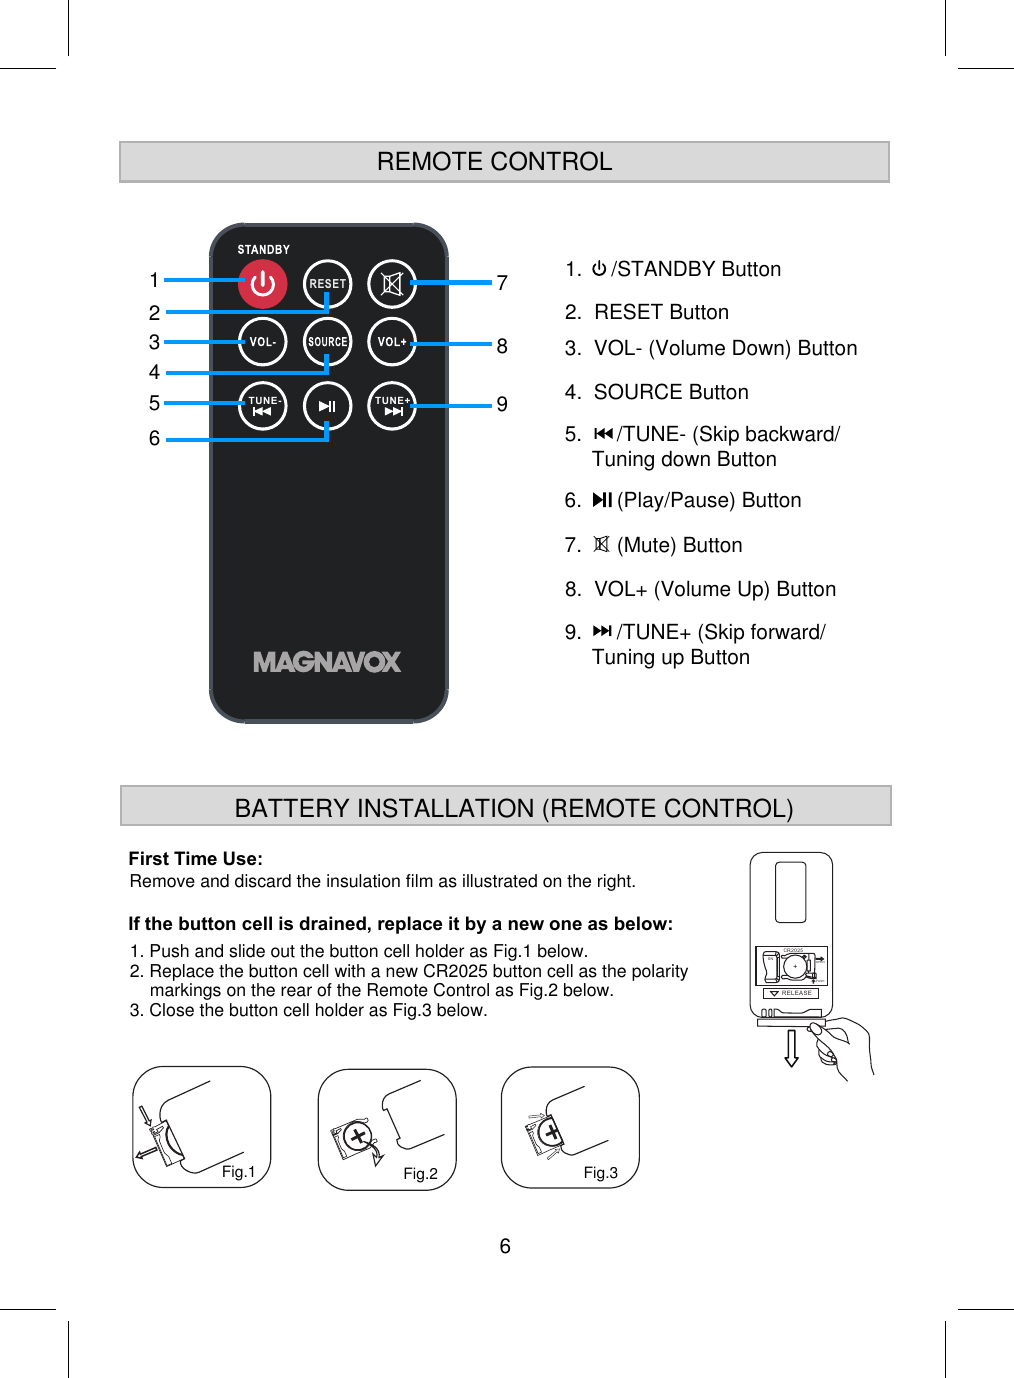 1.     /STANDBY Button3.  VOL- (Volume Down) Button4.  SOURCE Button7.      (Mute) Button6.      (Play/Pause) Button8.  VOL+ (Volume Up) ButtonREMOTE CONTROL6RESETTUN E TUN E+- BATTERY INSTALLATION (REMOTE CONTROL)1234567892.  RESET ButtonRemove and discard the insulation film as illustrated on the right.RELEASEPUSHOPENR2025C+SNFig.1 Fig.2 Fig.3First Time Use:If the button cell is drained, replace it by a new one as below:1. Push and slide out the button cell holder as Fig.1 below.2. Replace the button cell with a new CR2025 button cell as the polaritymarkings on the rear of the Remote Control as Fig.2 below.3. Close the button cell holder as Fig.3 below.5.      /TUNE- (Skip backward/Tuning down Button9.      /TUNE+ (Skip forward/Tuning up Button